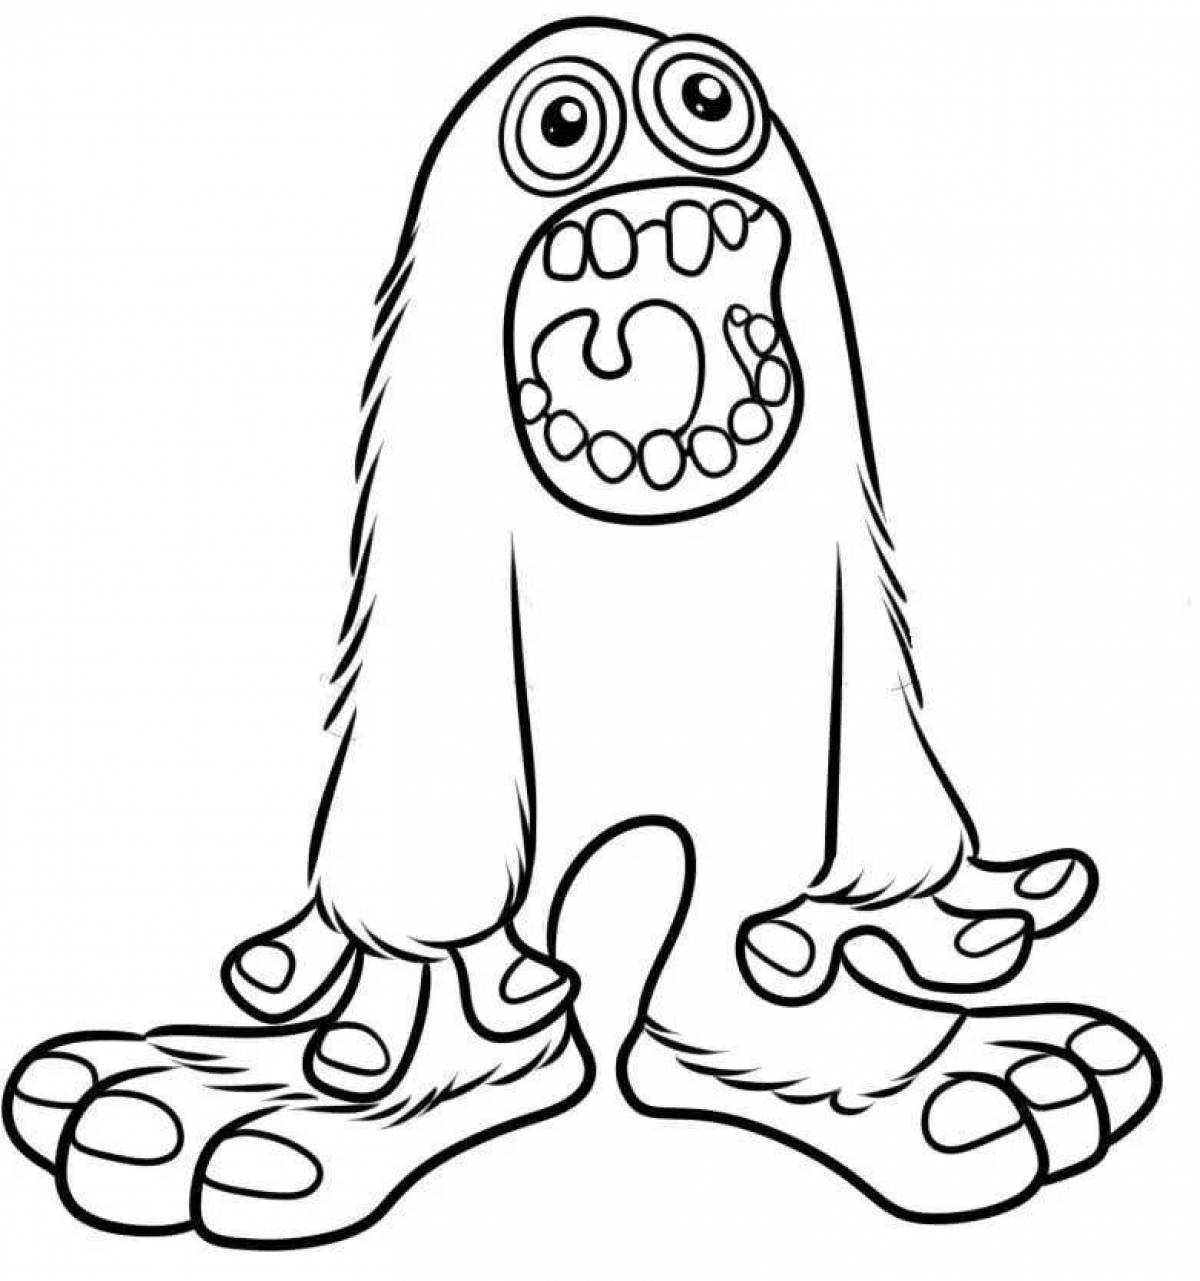 Adorable singing monster May coloring page